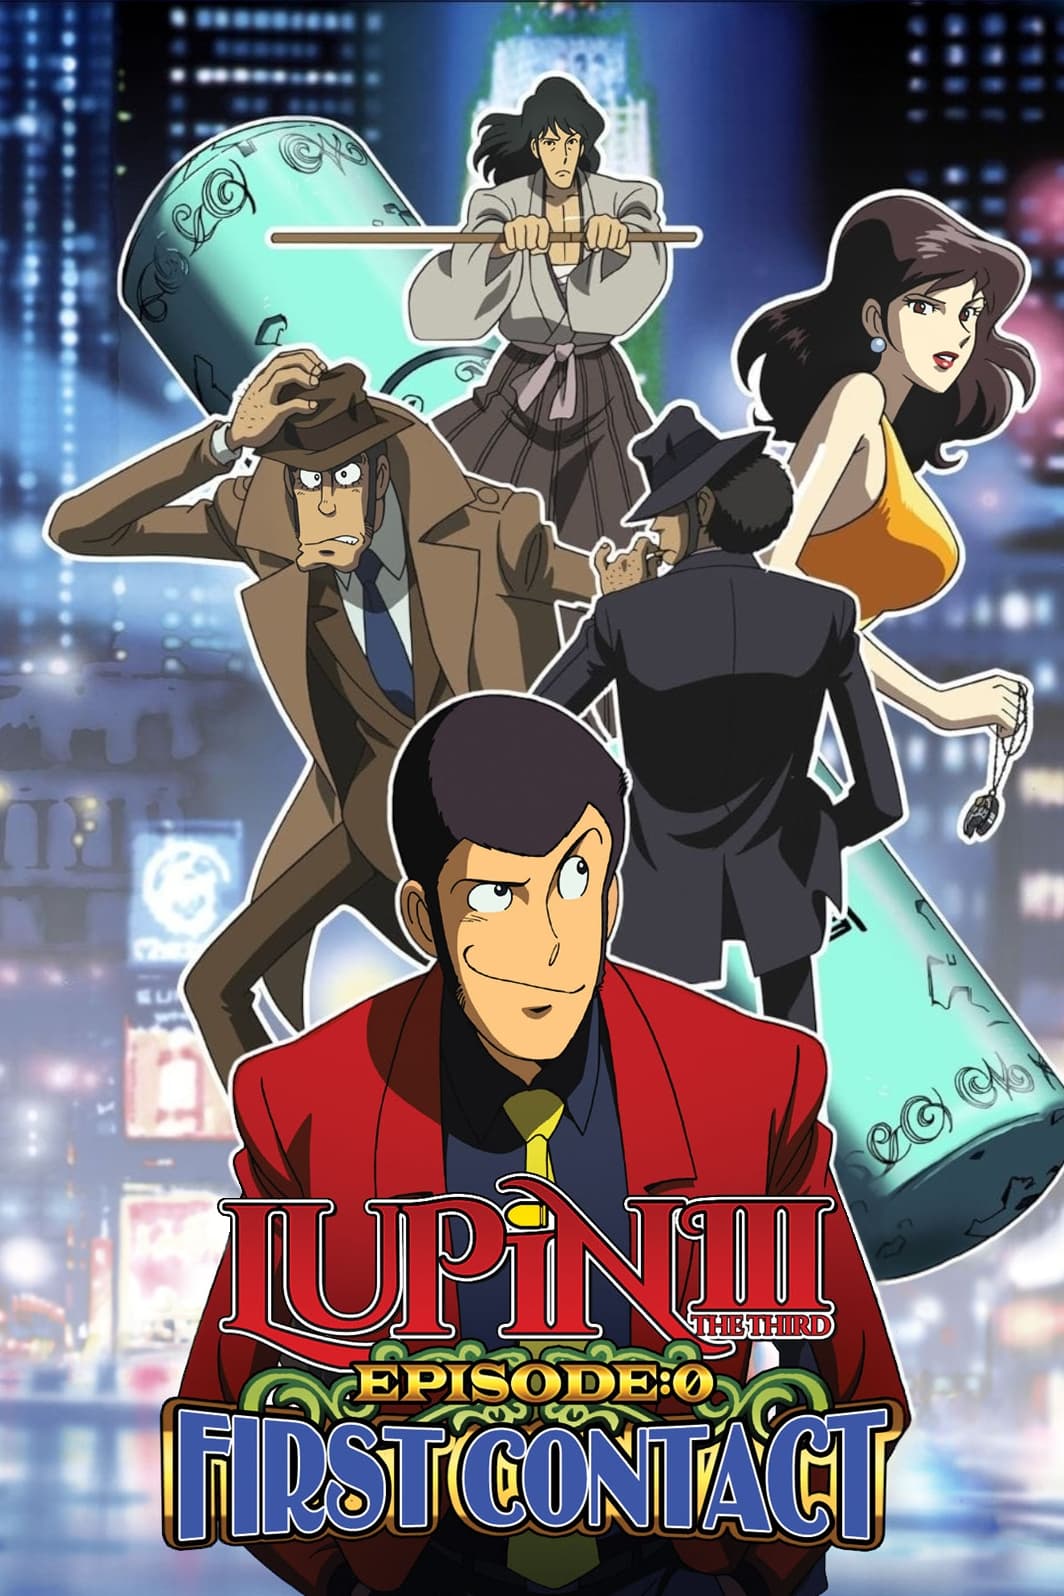 Lupin III: Episode 0: First Contact (2002)